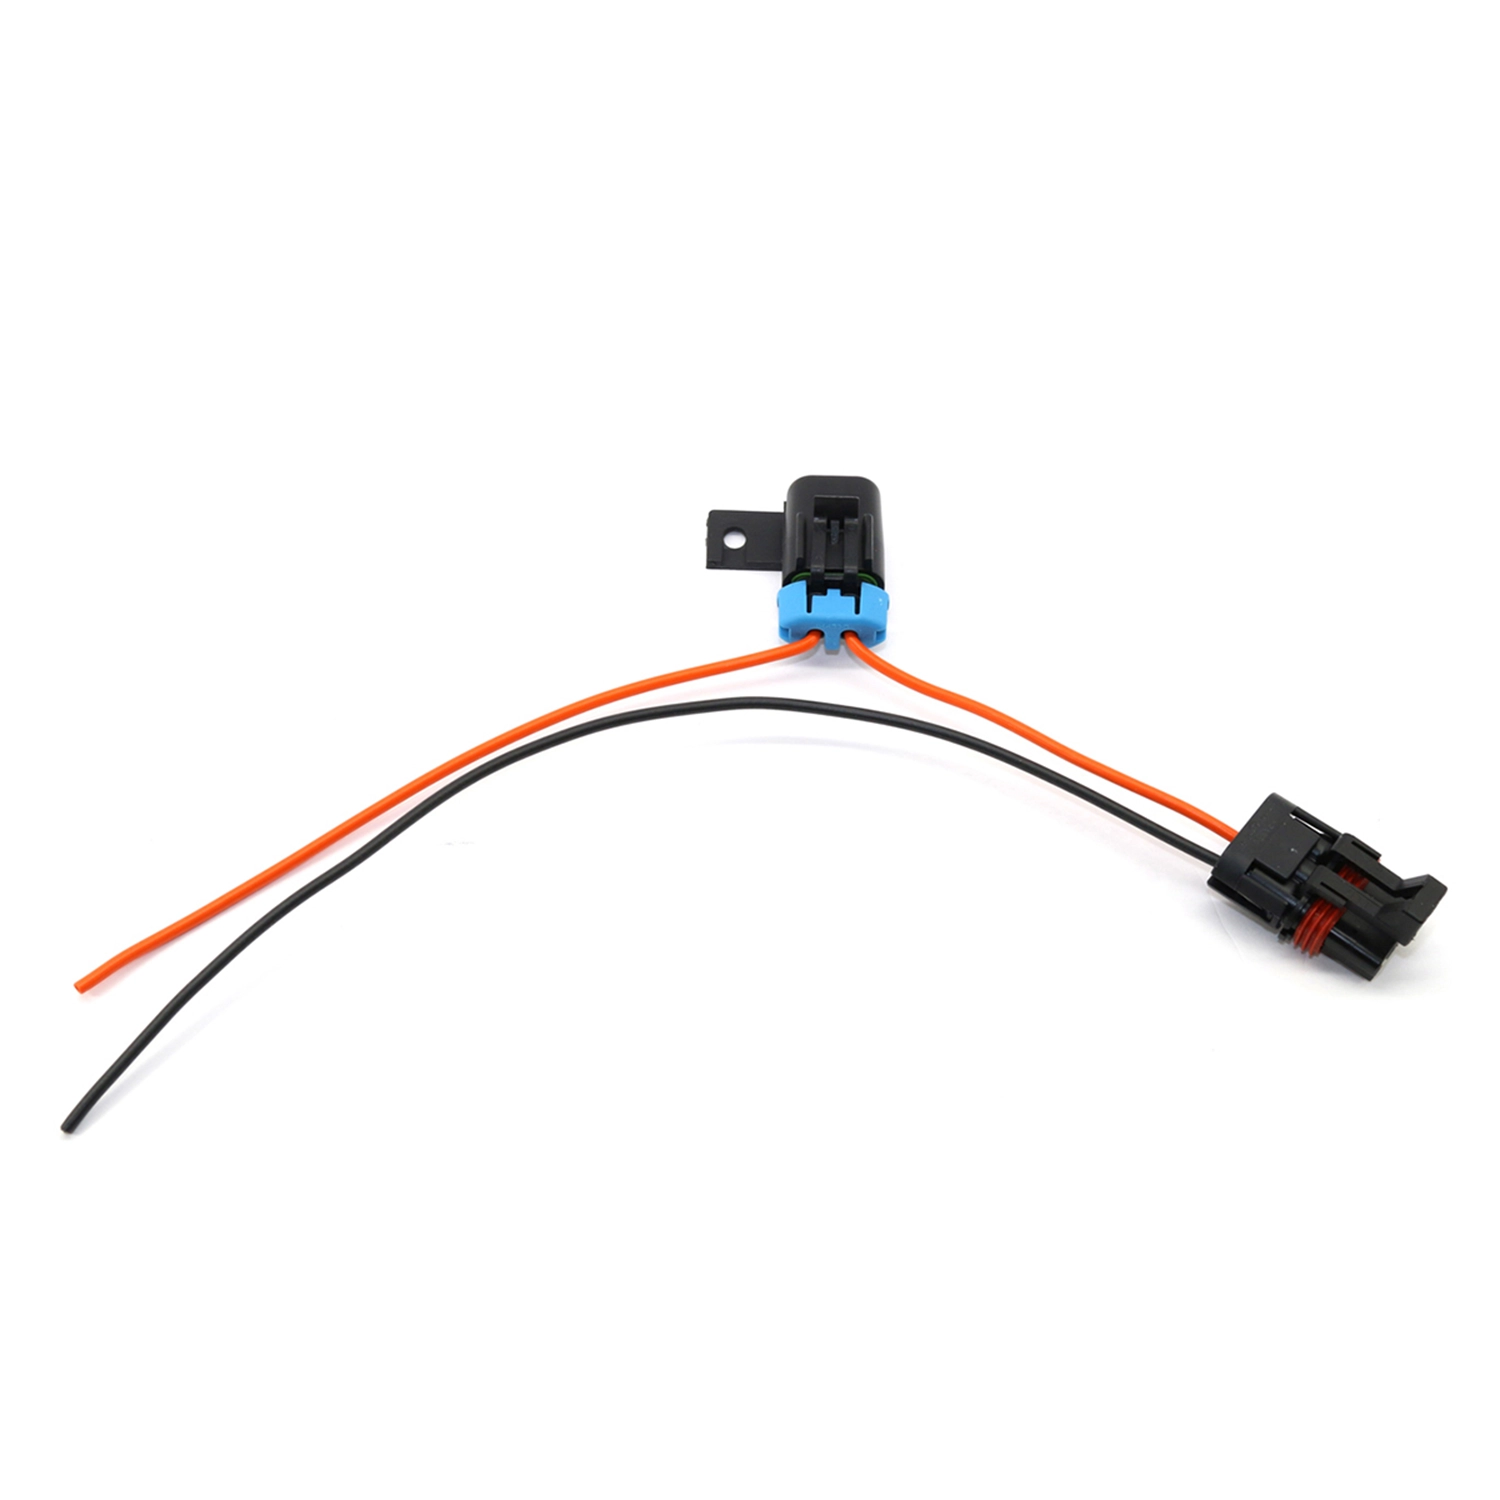 xtc power products polaris pulse busbar accessory wiring harness with 14 gauge fused ign gnd wires